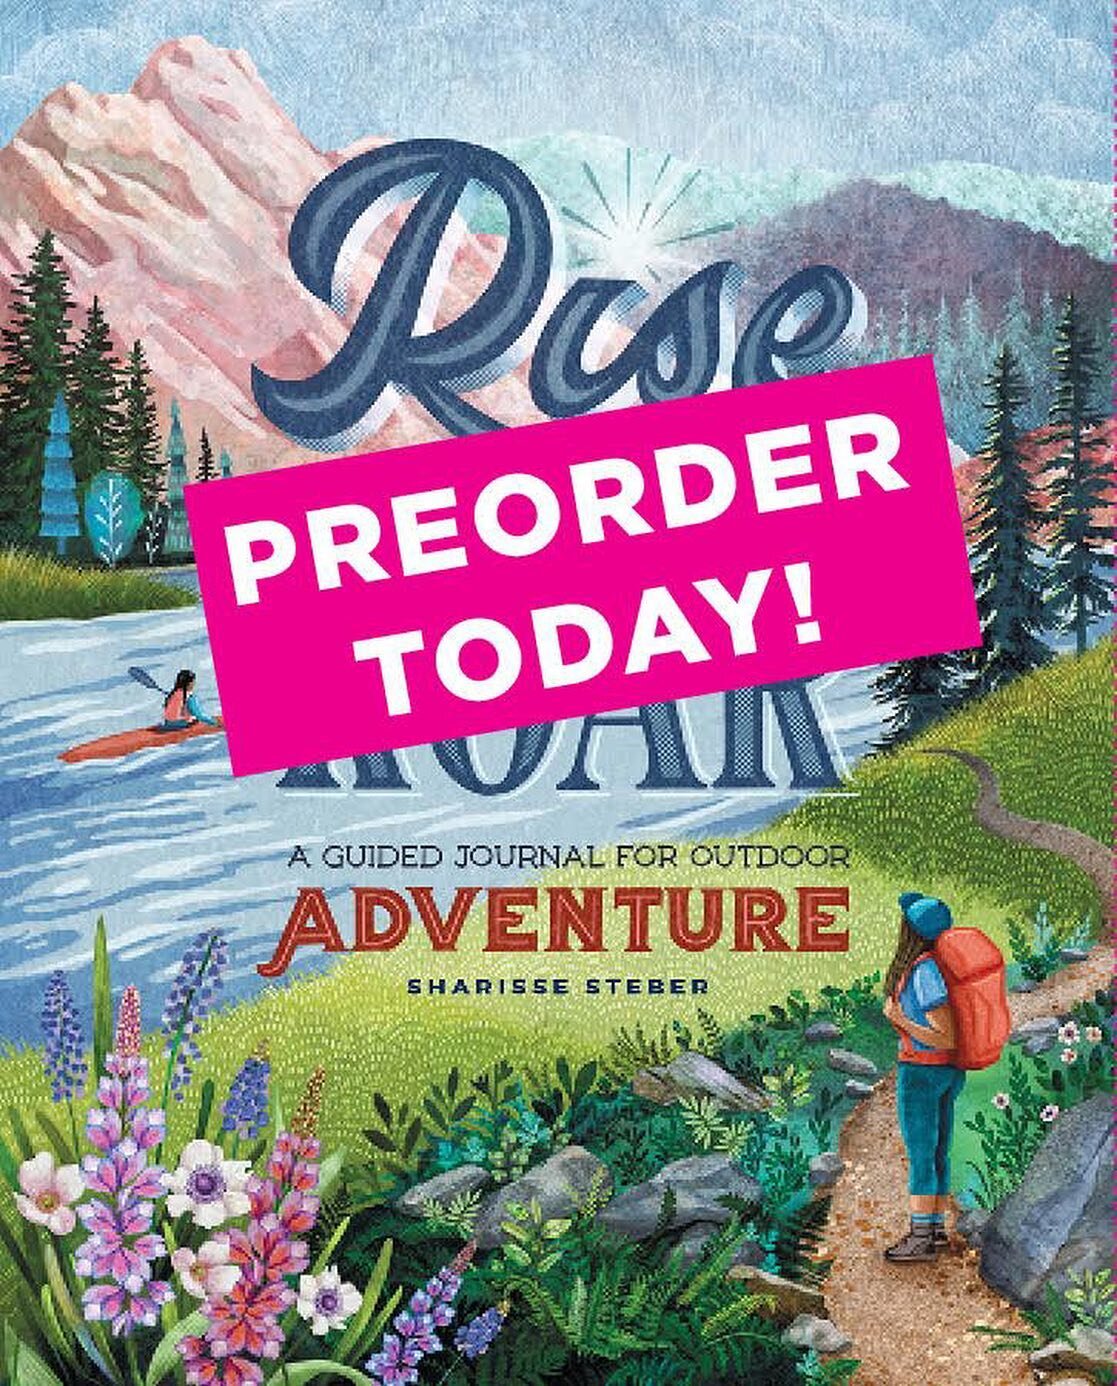 🚨TODAY IS THE DAY!🚨 You can now preorder my book &ldquo;Rise &amp; Roar, A guided journal for outdoor adventure&rdquo; wherever books are sold. ✅Click link in bio above ☝🏽to preorder. Book available August 1, 2021 ✨by @mtnbooks ✨
.
I&rsquo;ve crea